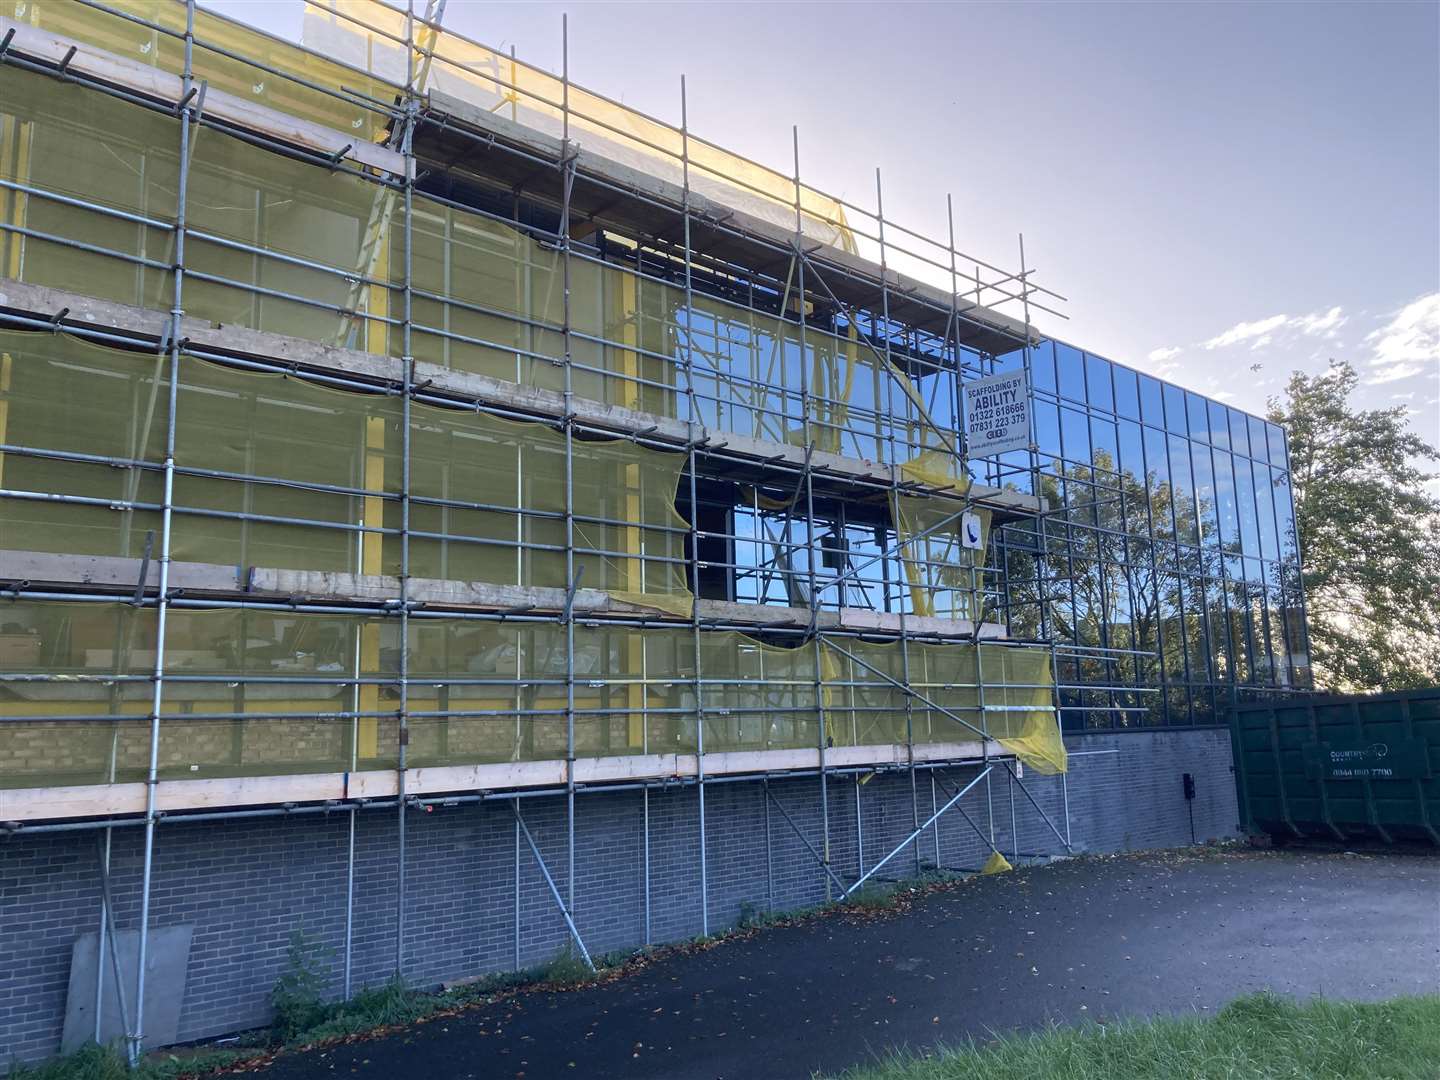 During: scaffolding covers Olympic Glass headquarters in Queenborough